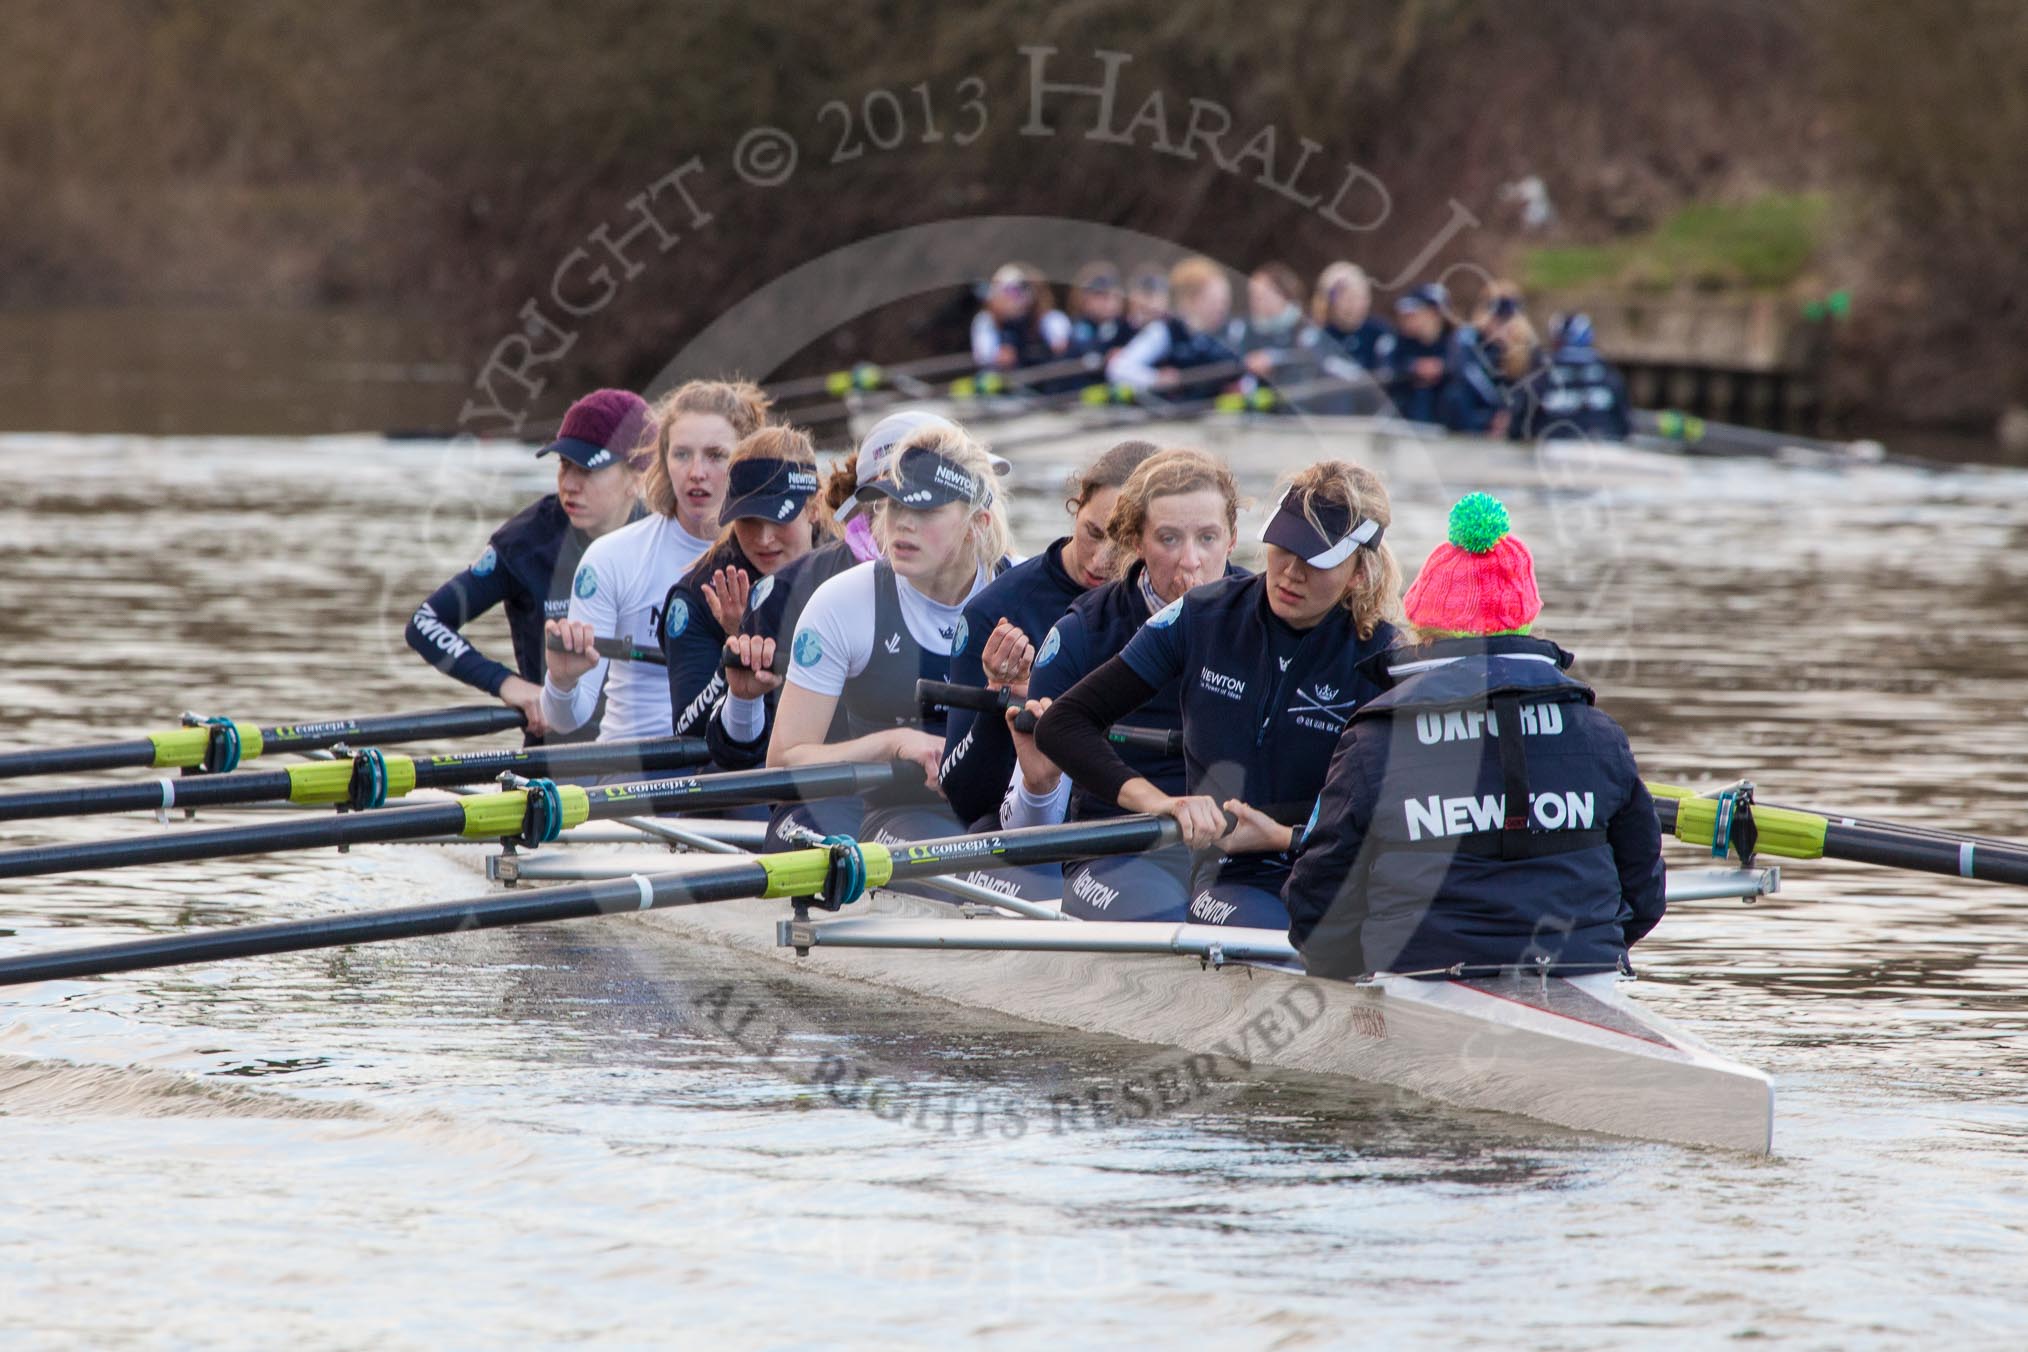 The Boat Race season 2013 - OUWBC training: The OUWBC Blue Boat during the training session - bow Mariann Novak, Alice Carrington-Windo, Mary Foord-Weston, Jo Lee, Amy Varney, Harriet Keane, Anastasia Chitty, stroke Maxie Scheske, and cox Katie Apfelbaum..
River Thames,
Wallingford,
Oxfordshire,
United Kingdom,
on 13 March 2013 at 17:10, image #93